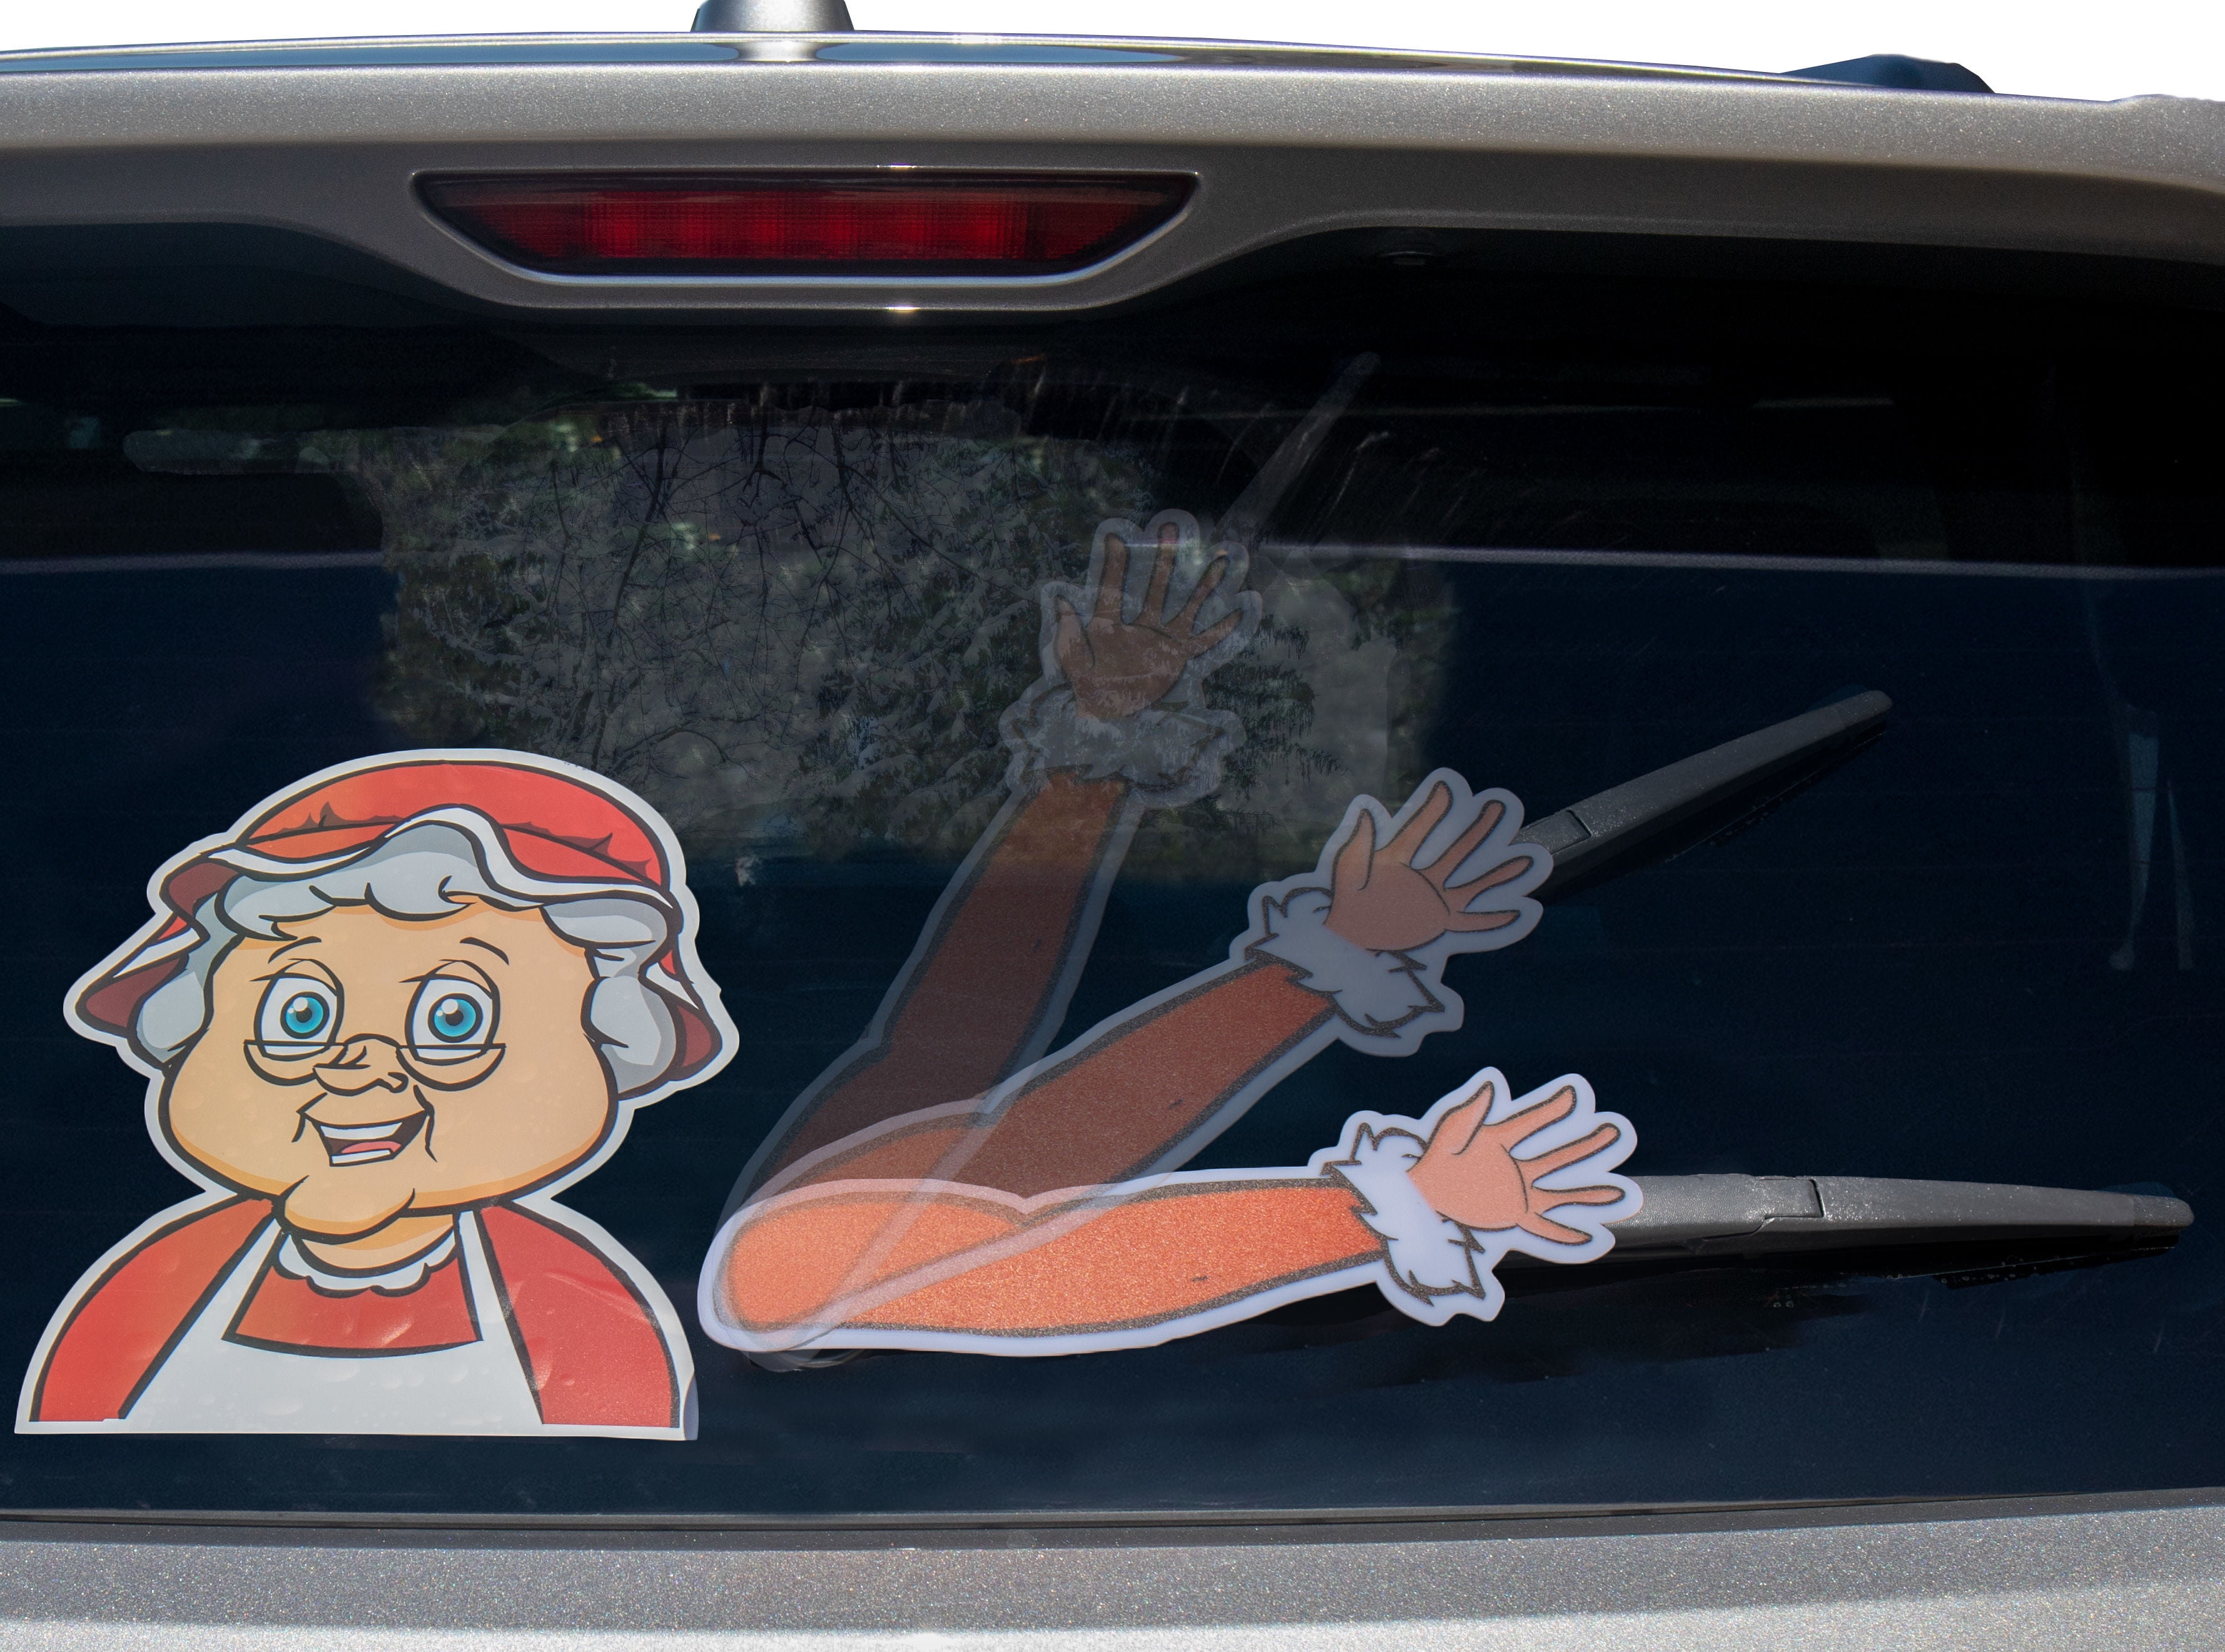 Details about   Xmas New Rear Windshield Santa Claus Window Decals Car Wiper Sticker Christmas 